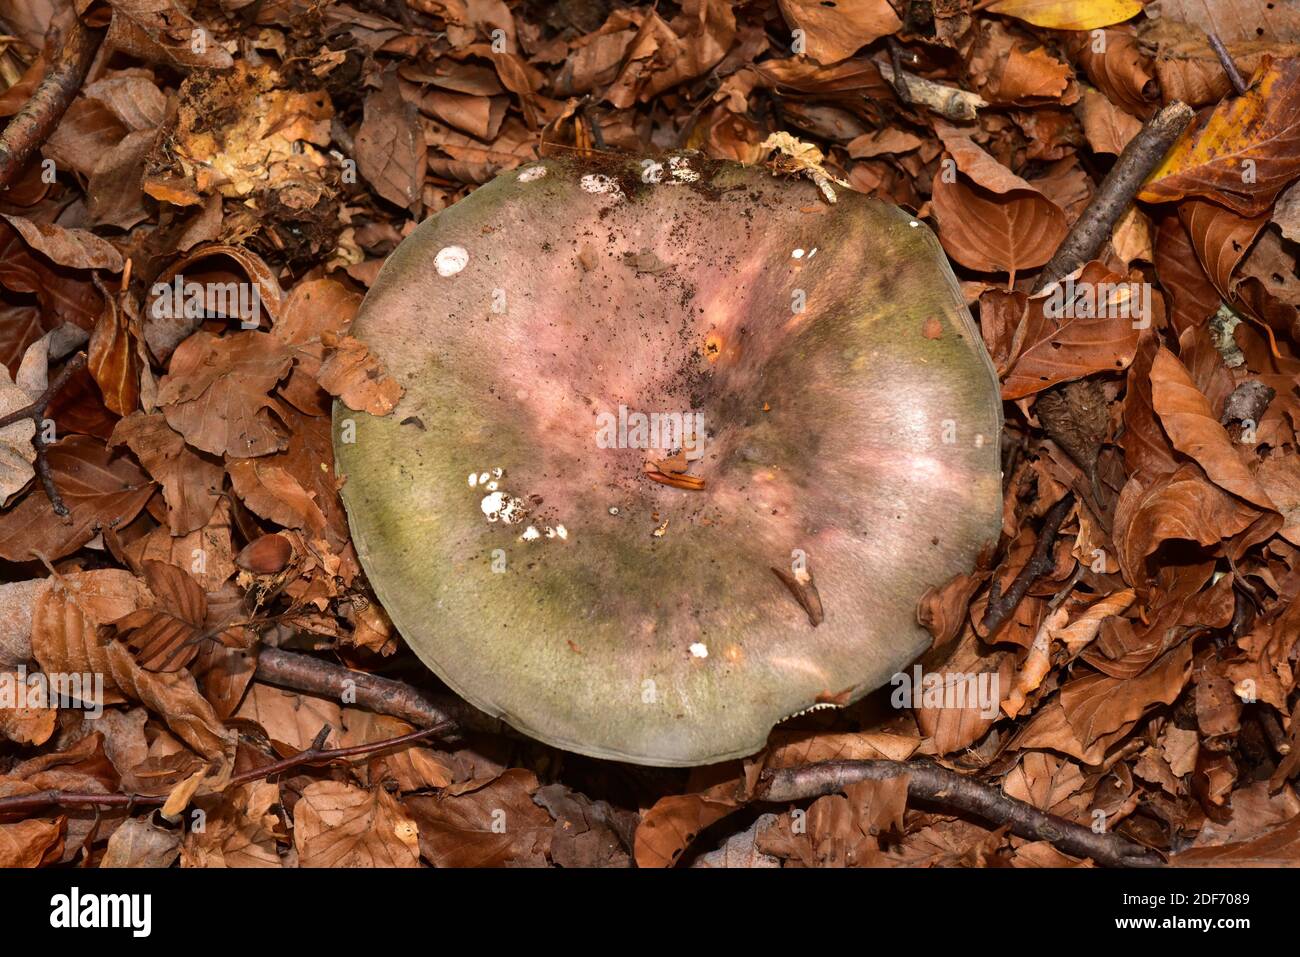 Charcoal burner (Russula cyanoxantha) is an edible mushroom. This photo was taken in Montseny Biosphere Reserve, Barcelona province, Catalonia, Spain. Stock Photo